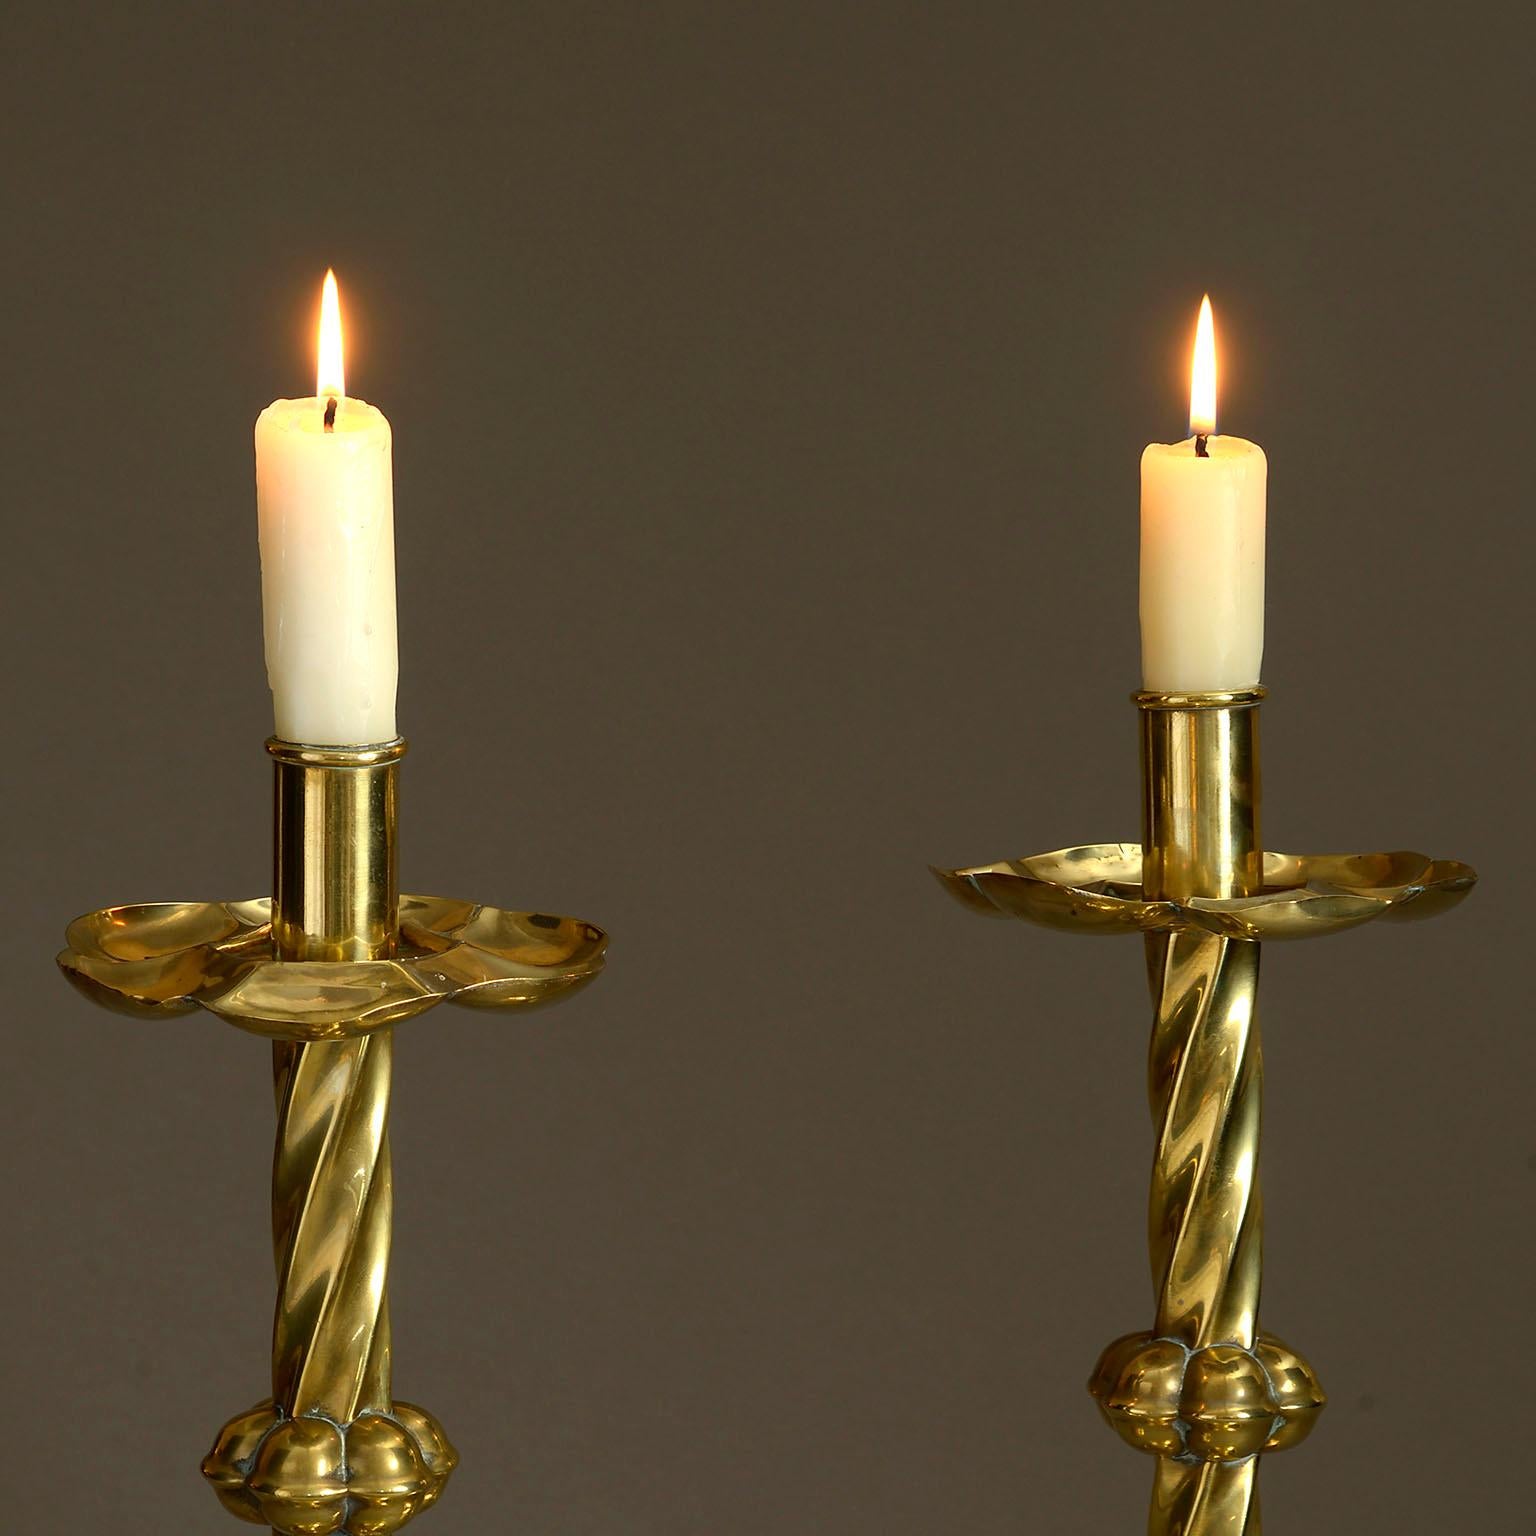 A tall pair of mid-19th century Victorian period polished brass candlesticks of good scale, the drip pans raised upon swirling stems with a circular bases.